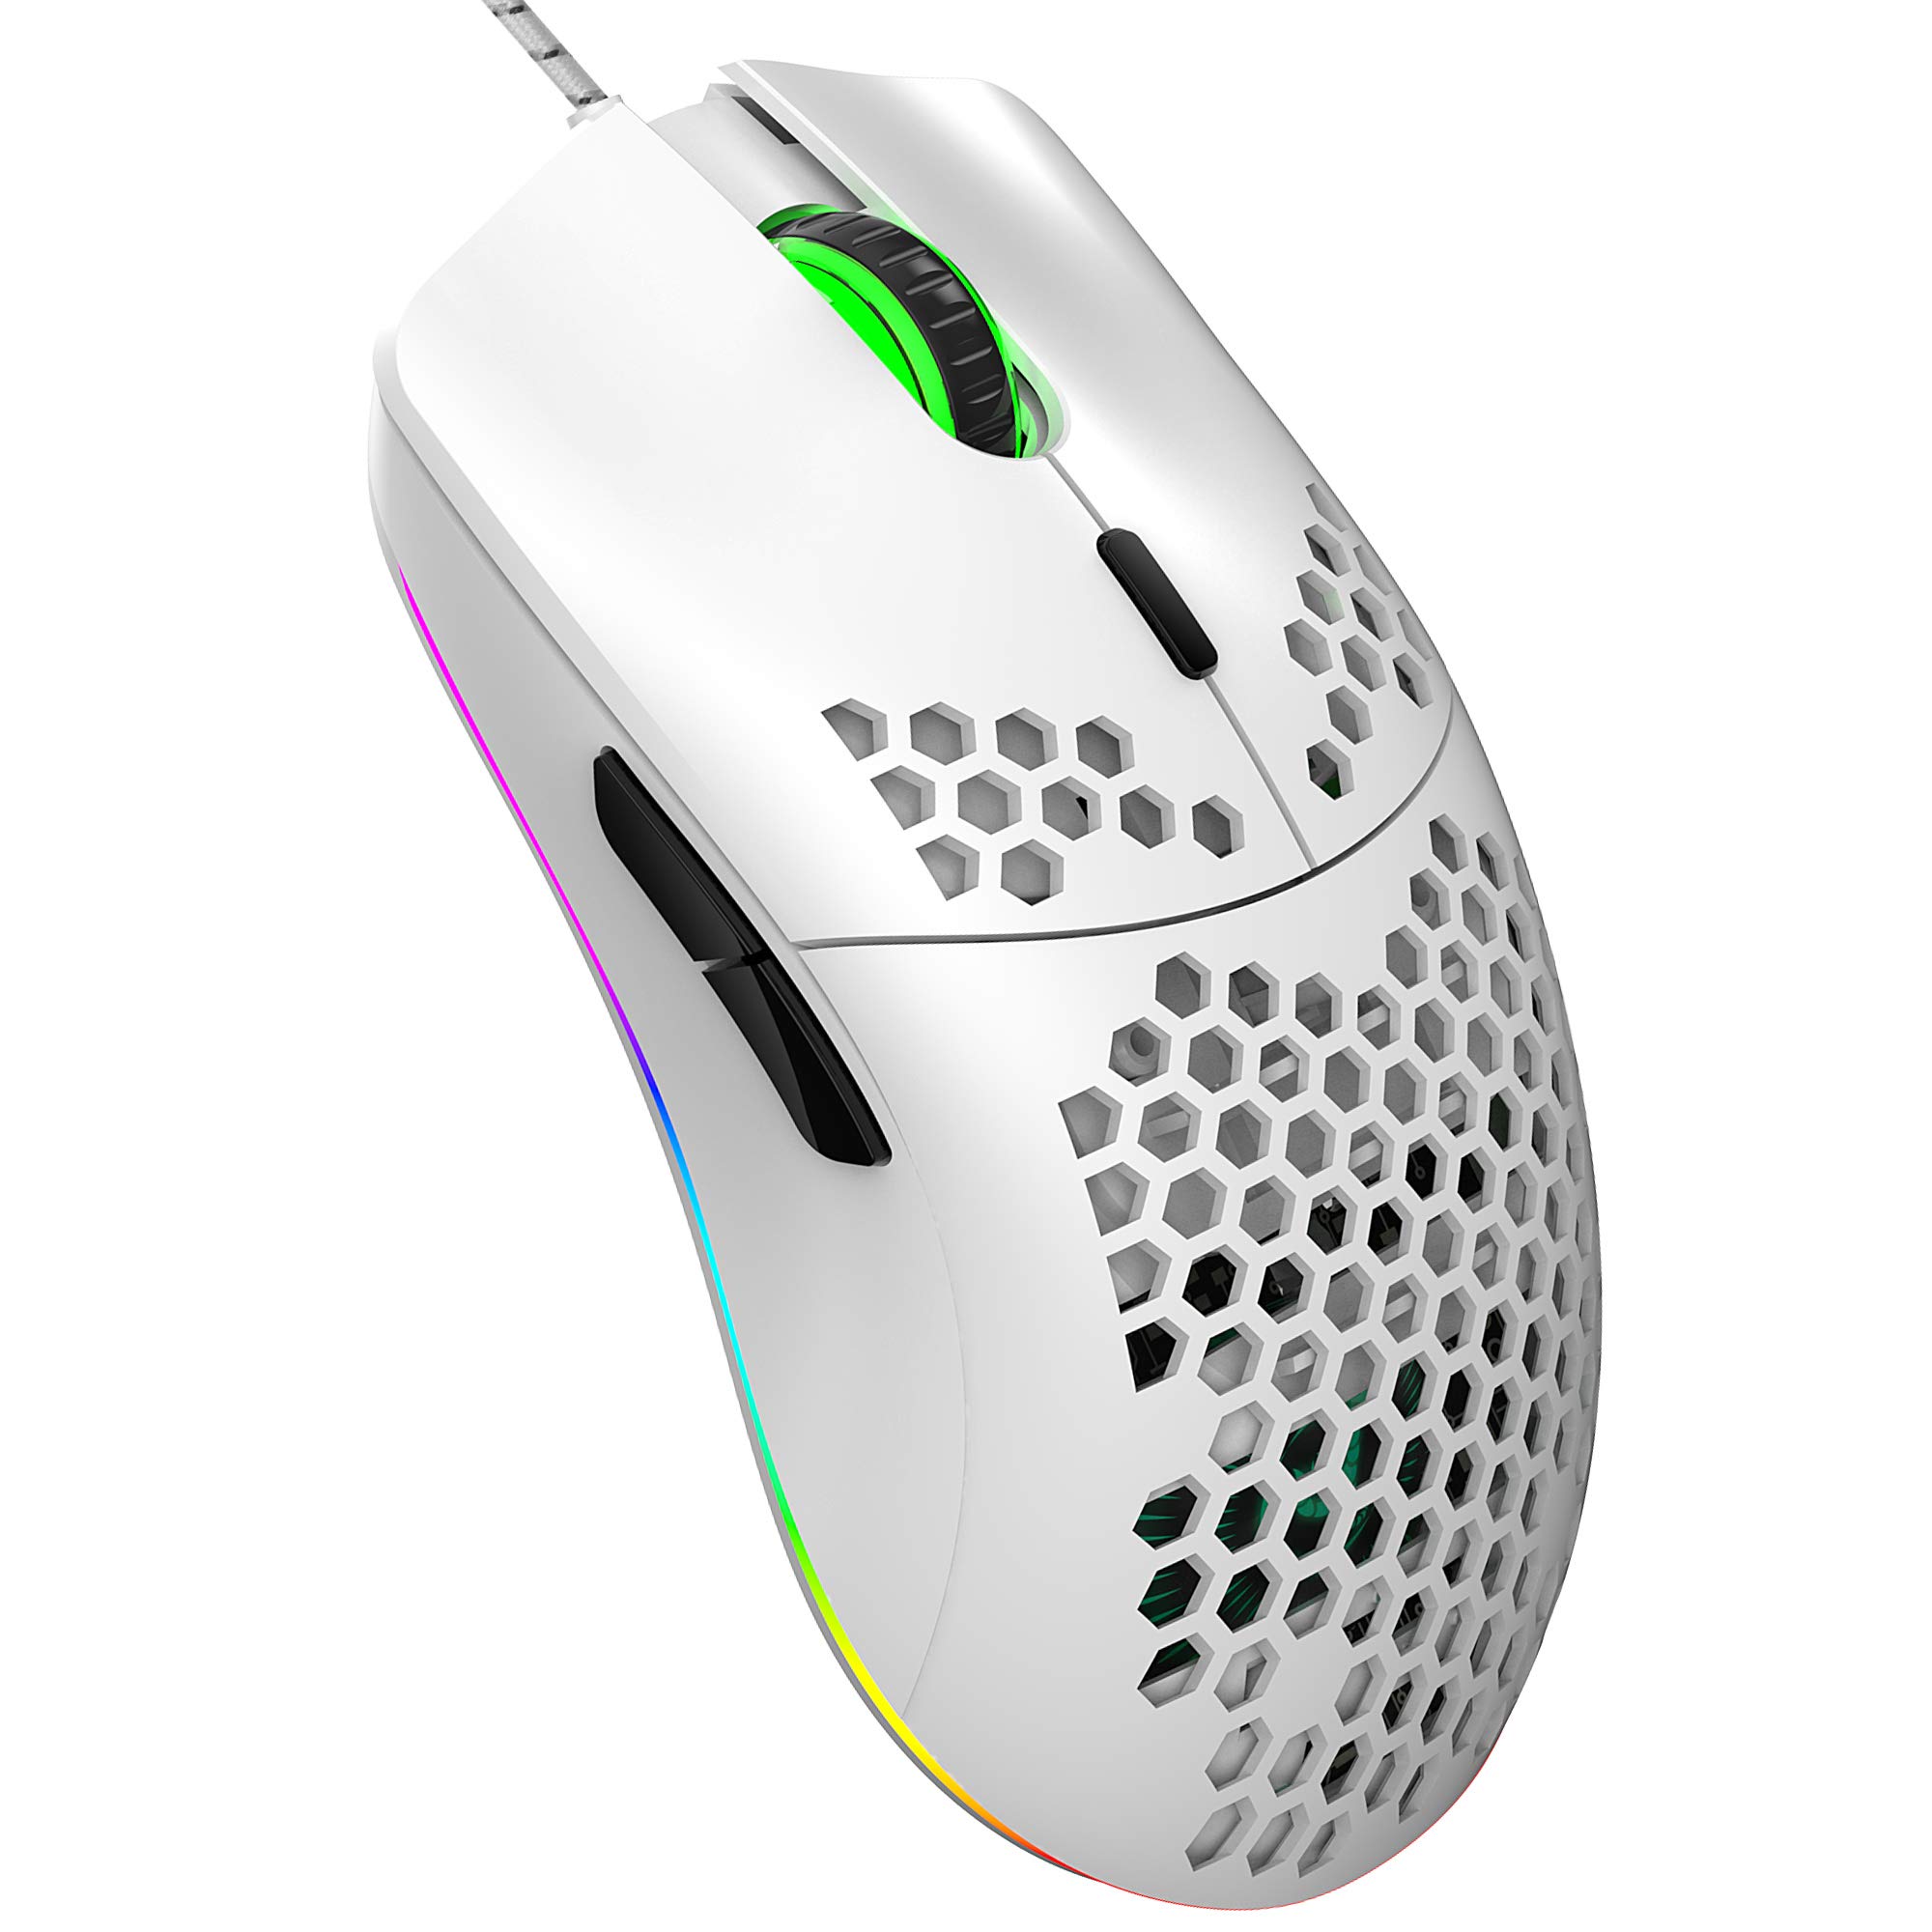 Wired Gaming Mouse, J900 6 RGB Lighting 6400 DPI Programmable USB Gaming Mice with 6 buttons, Honeycomb Shell Ergonomic Design for PC Gamers and Xbox and PS4 Users- White